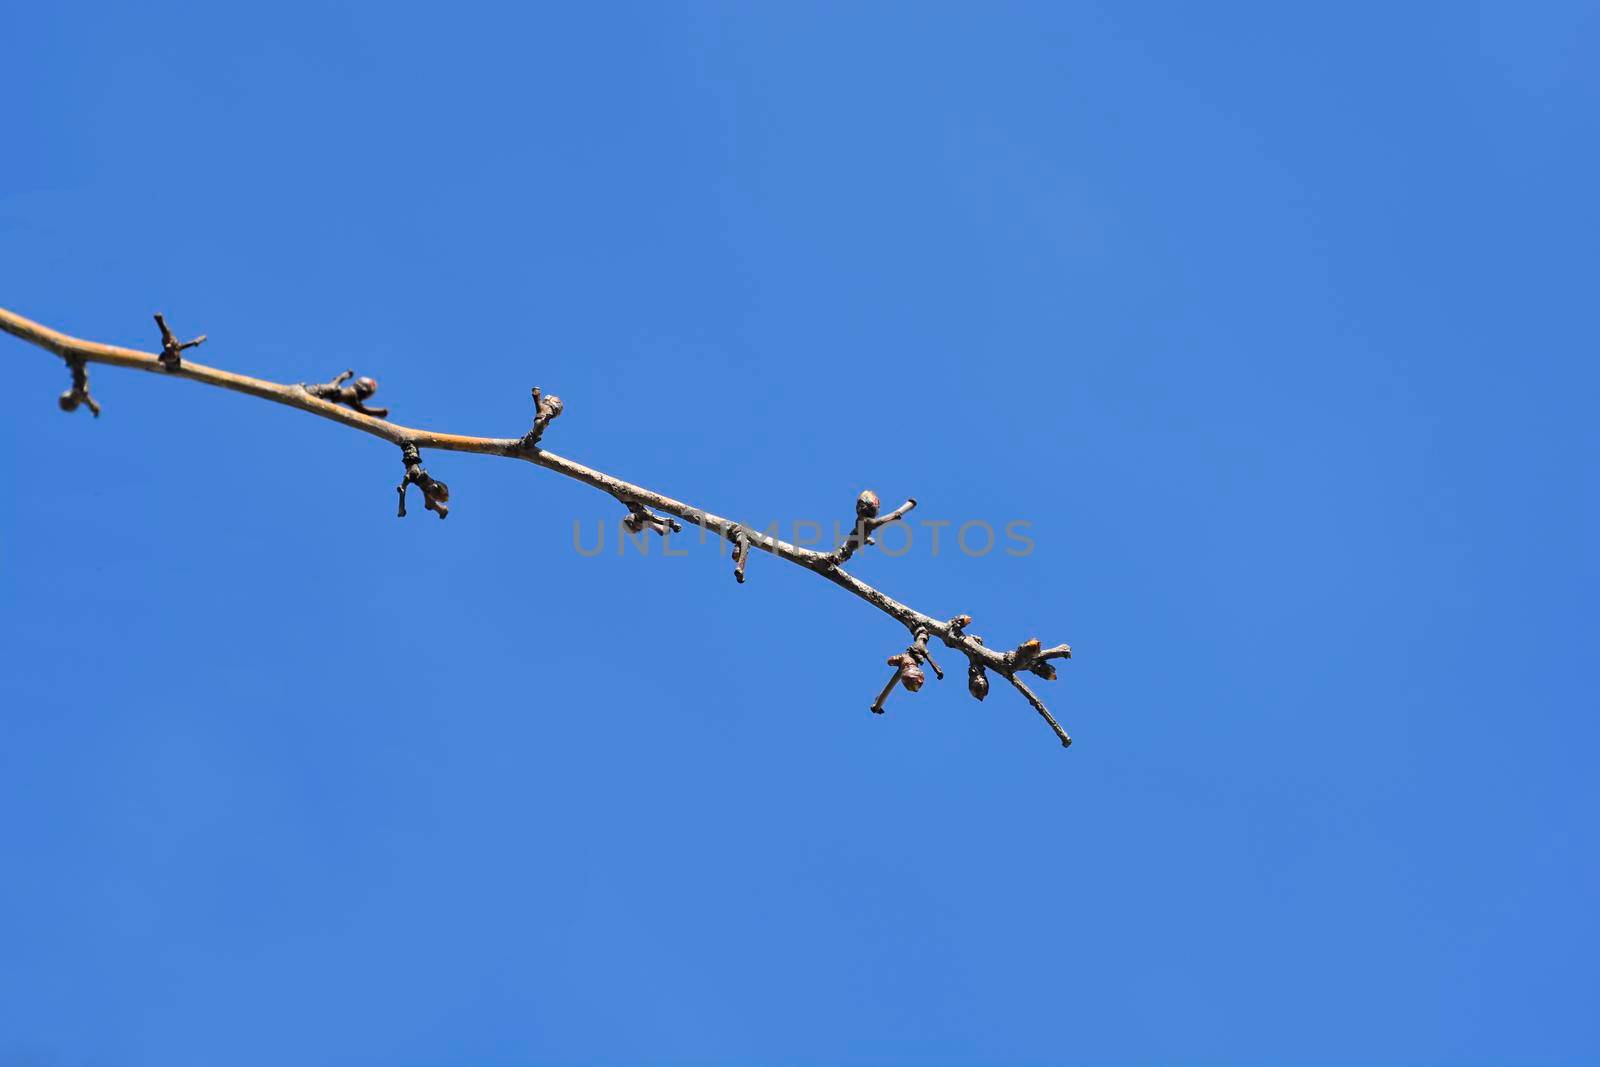 Common Hawthorn branch with buds against blue sky - Latin name - Crataegus monogyna